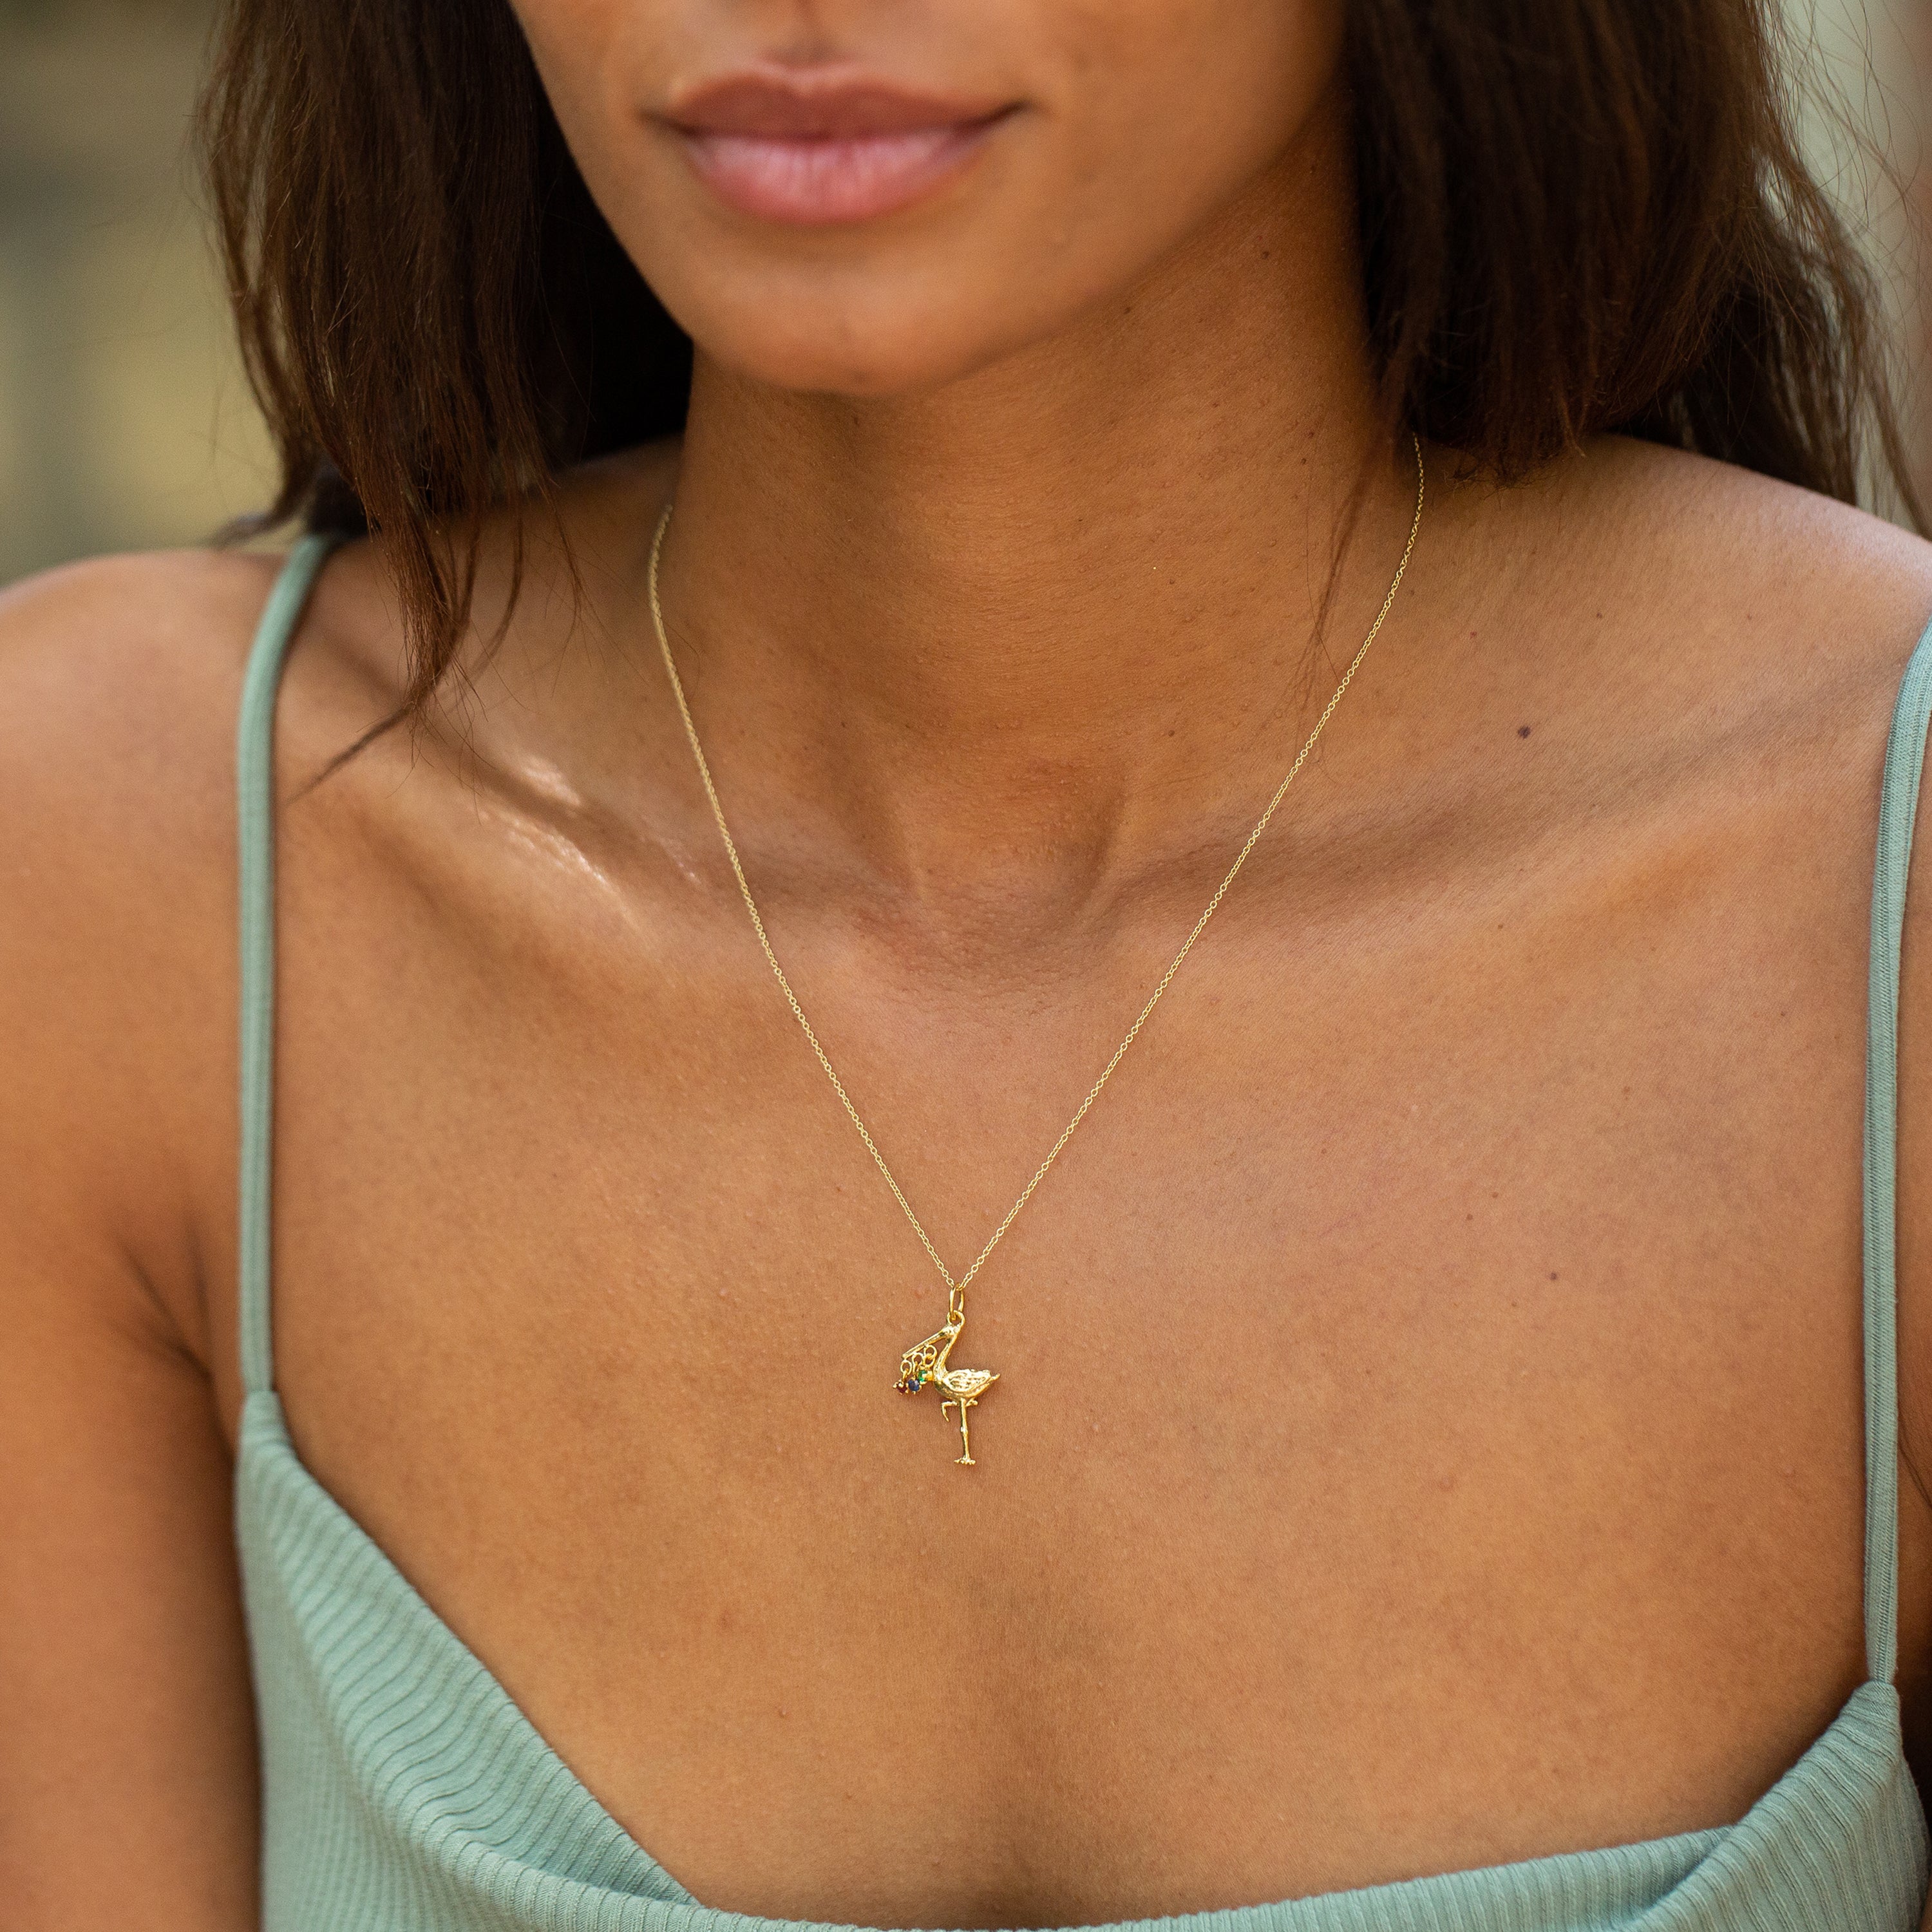 The F&B Yellow Gold Birthstone Stork Necklace